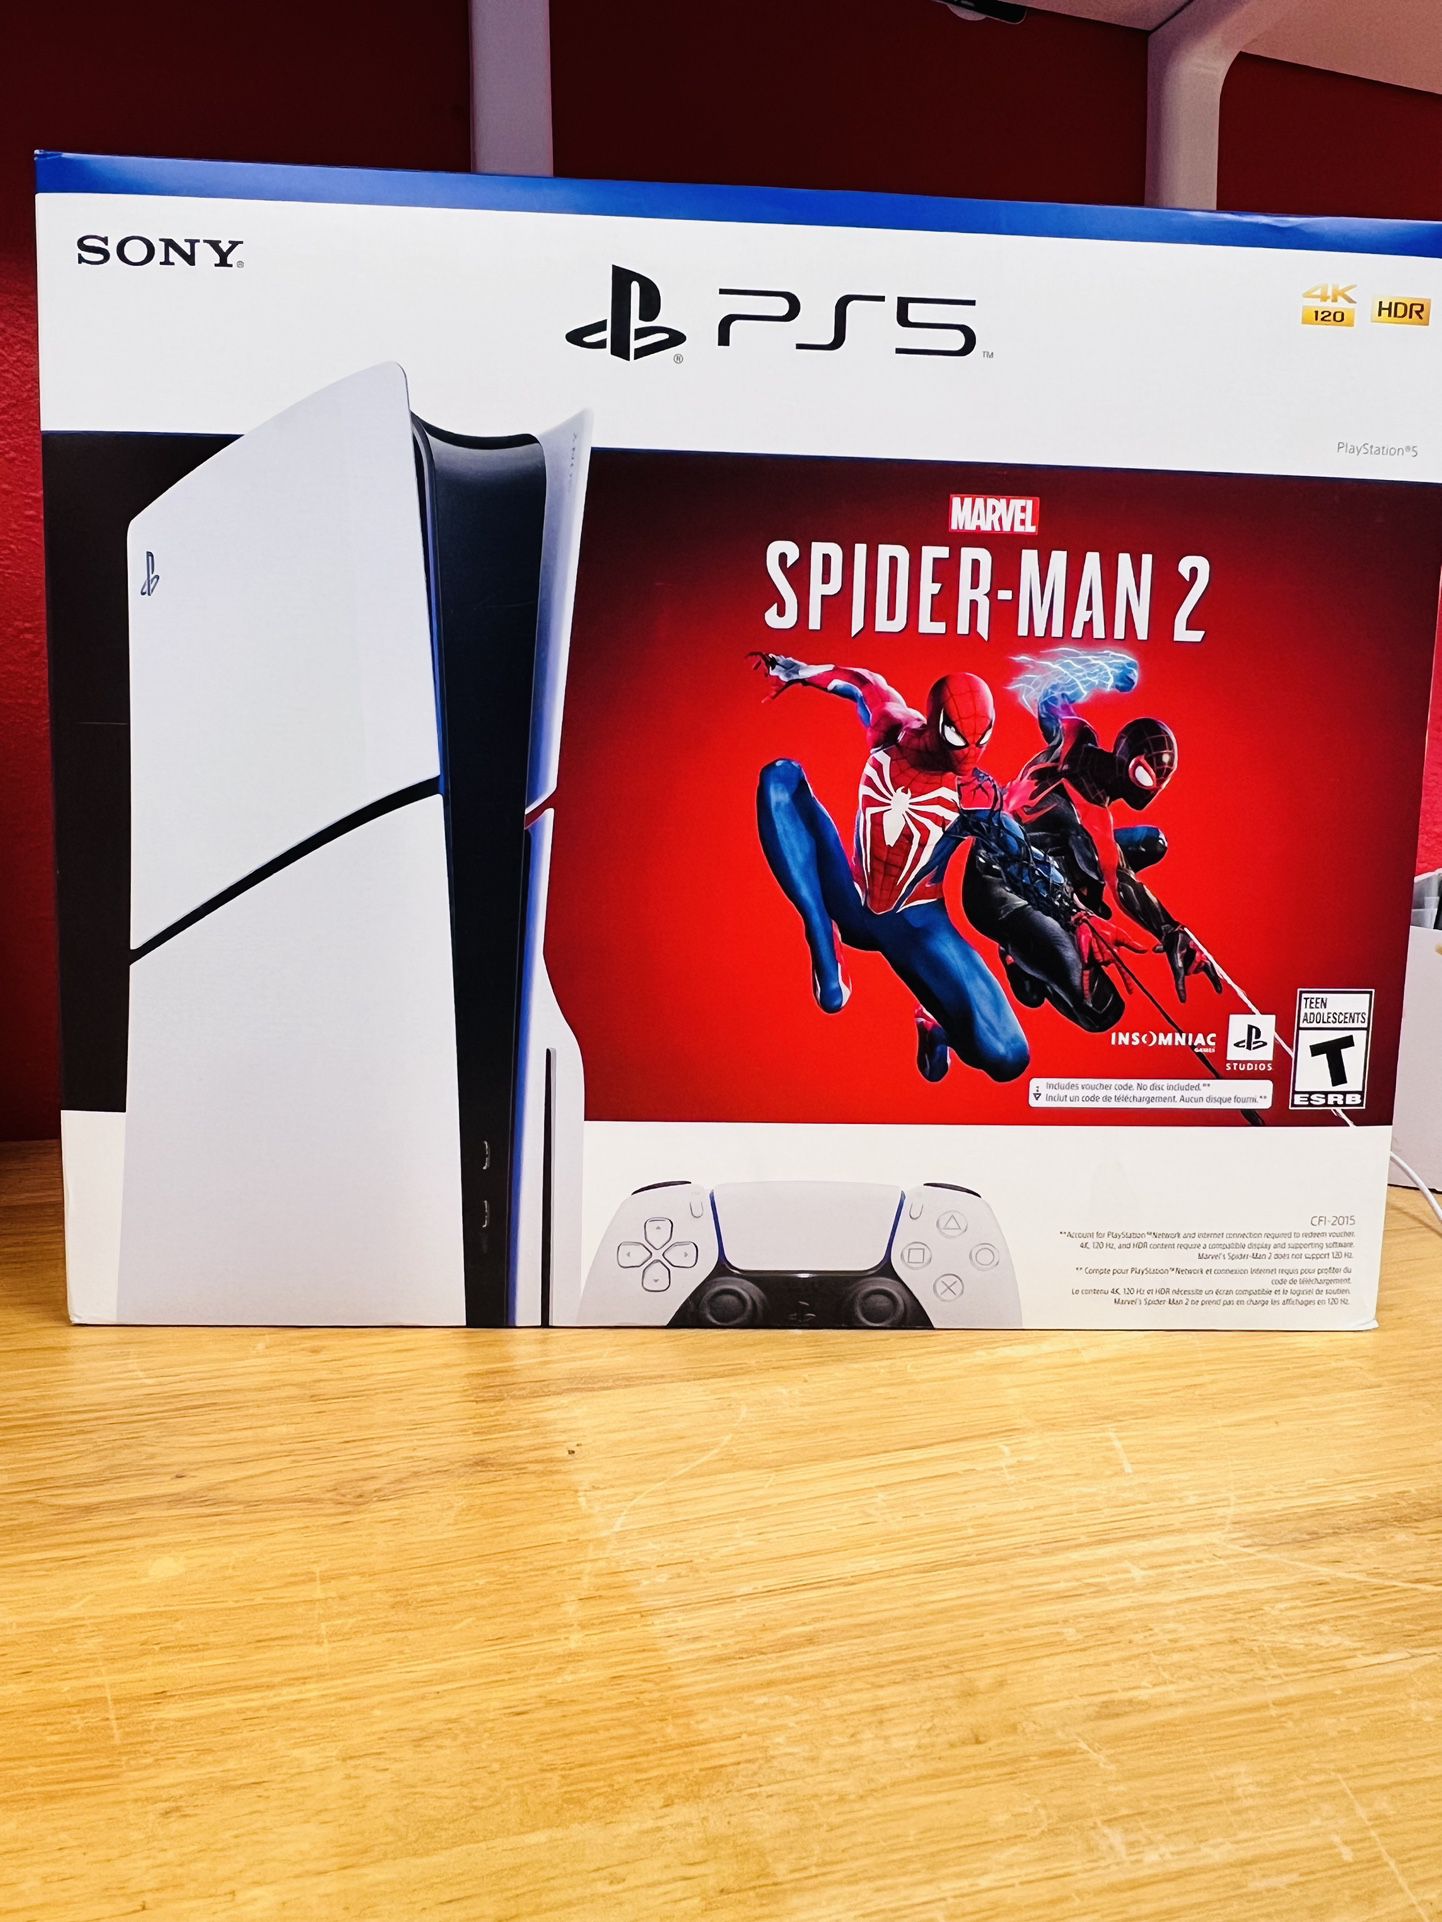 PS5 With Spider-Man 2 Game